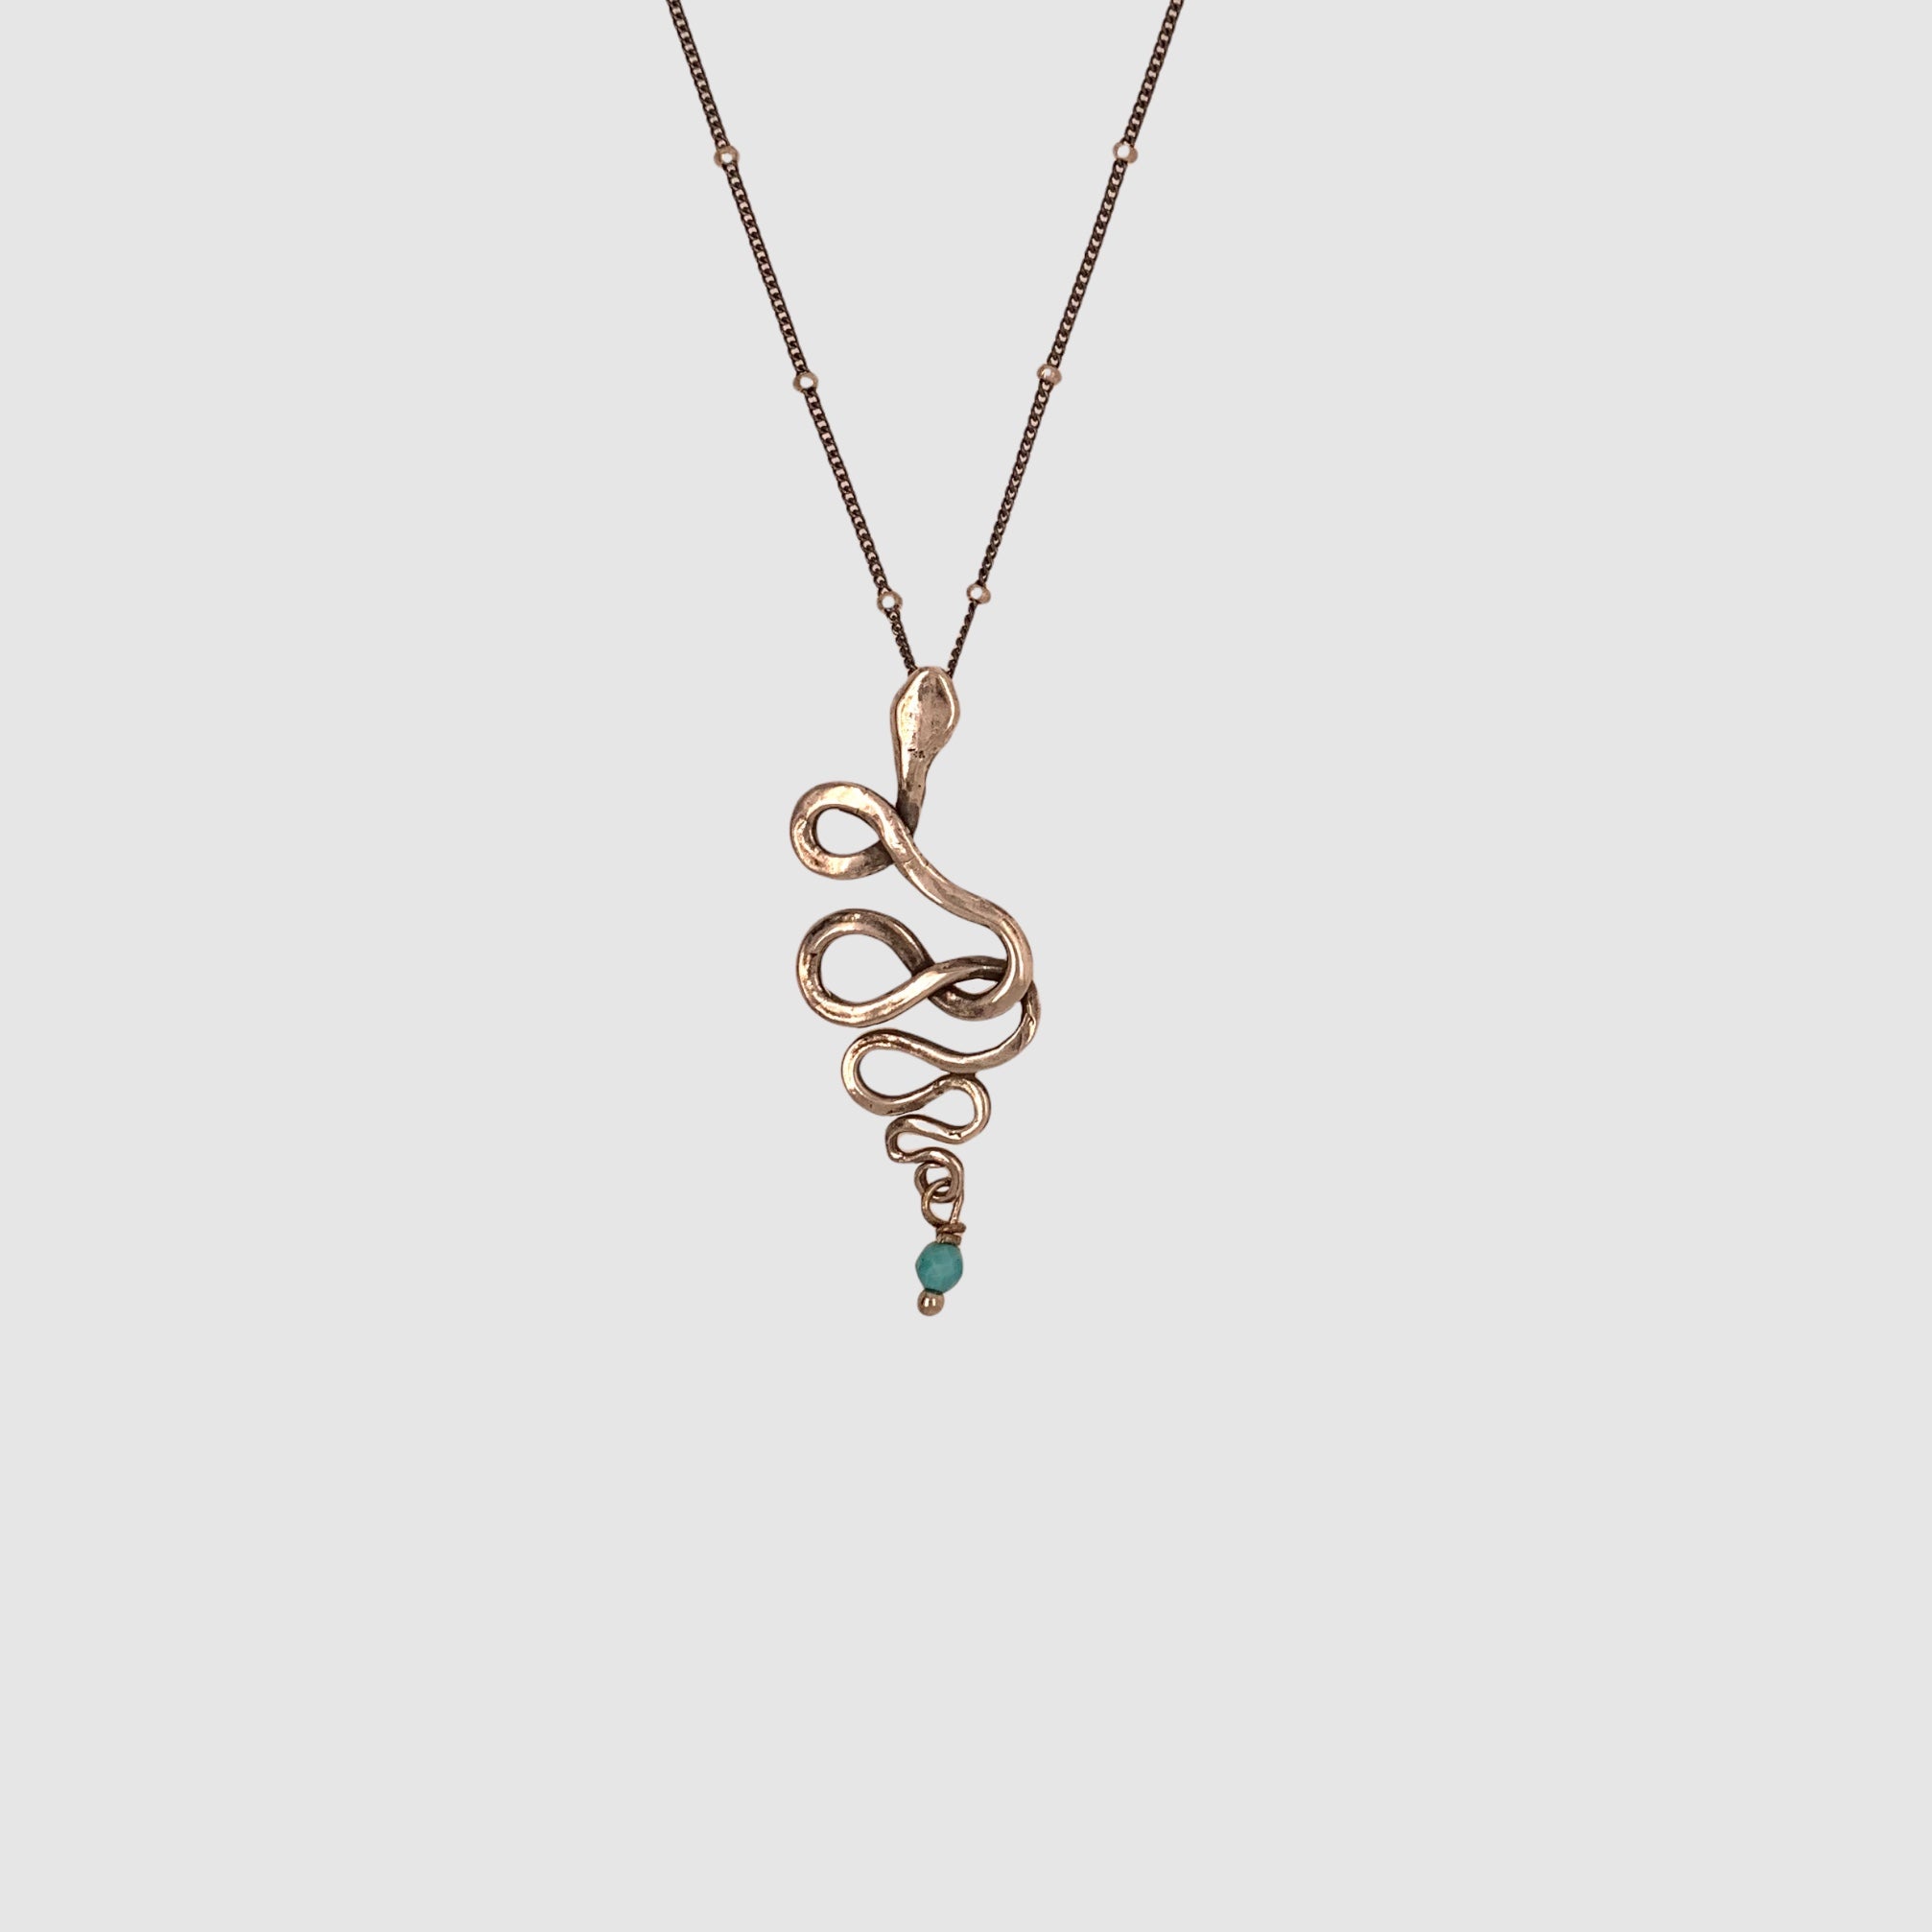 SNAKE PENDANT  // NECKLACE // SILVER // TURQUOISE